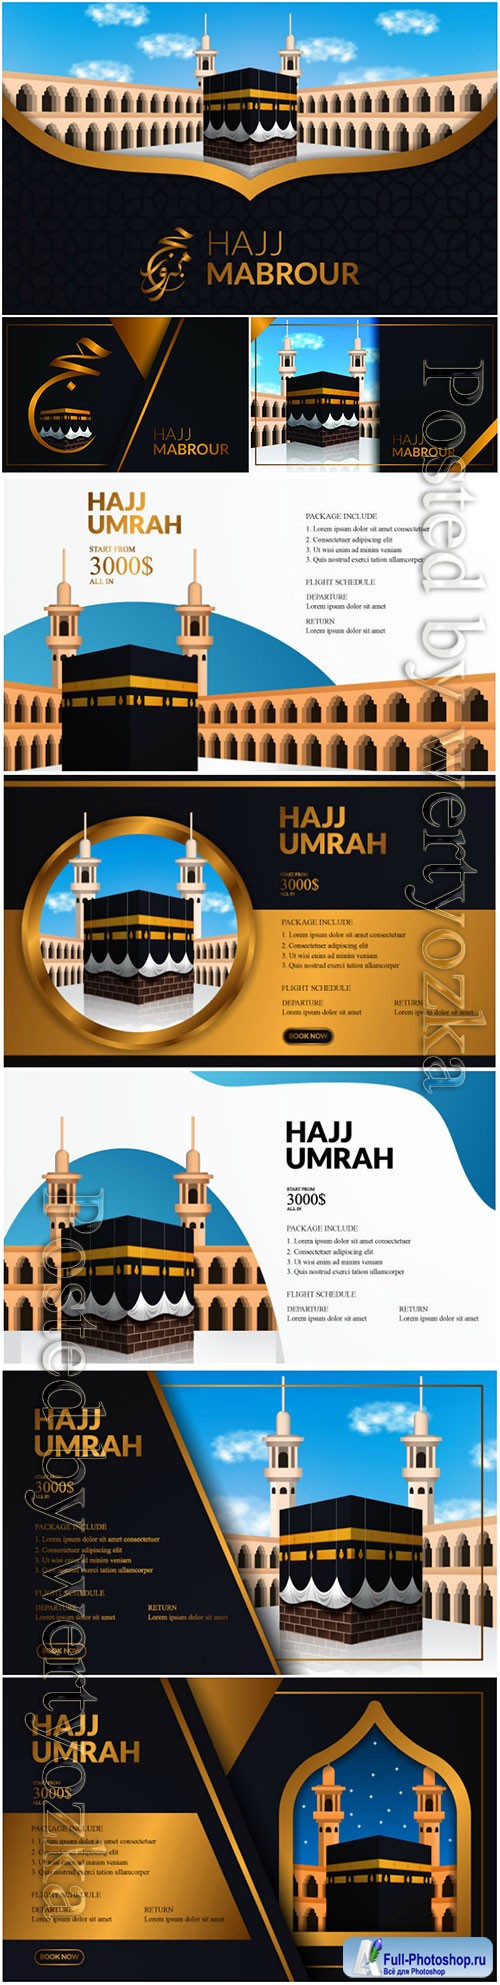 Greeting card for hajj or umrah mabrur with golden arabic calligraphy and kaaba realistic illustration, hajj pilgrimage to mecca